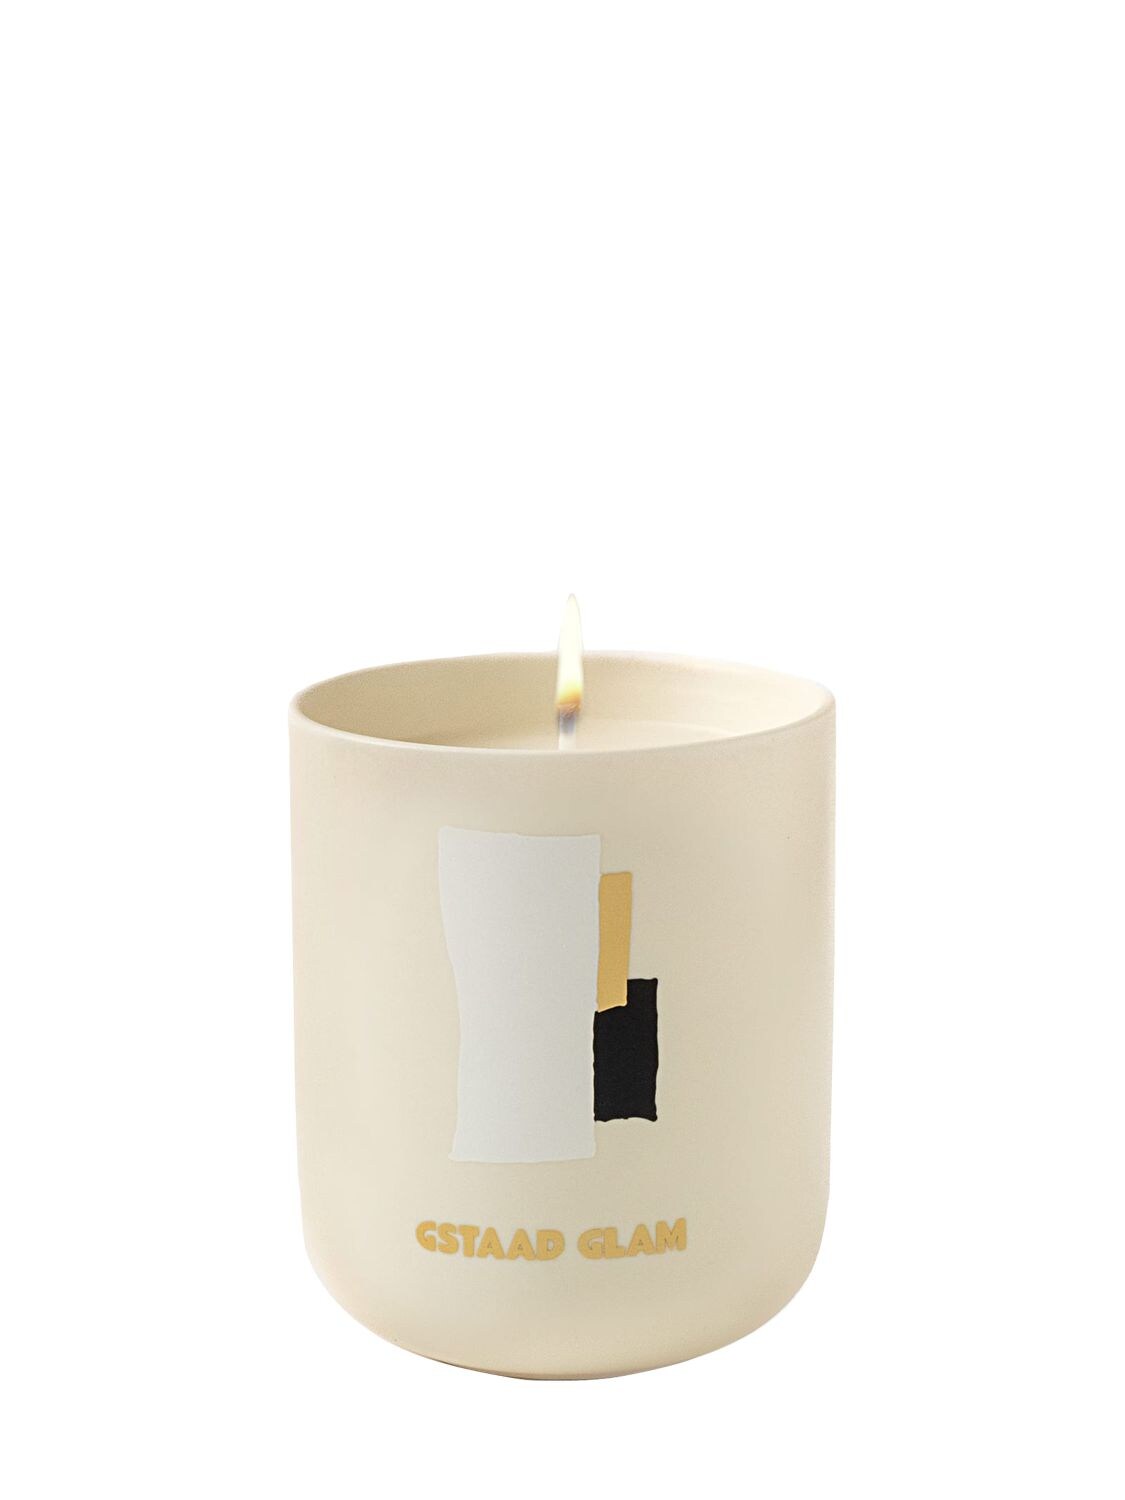 Shop Assouline Gstaad Glam Scented Candle In White